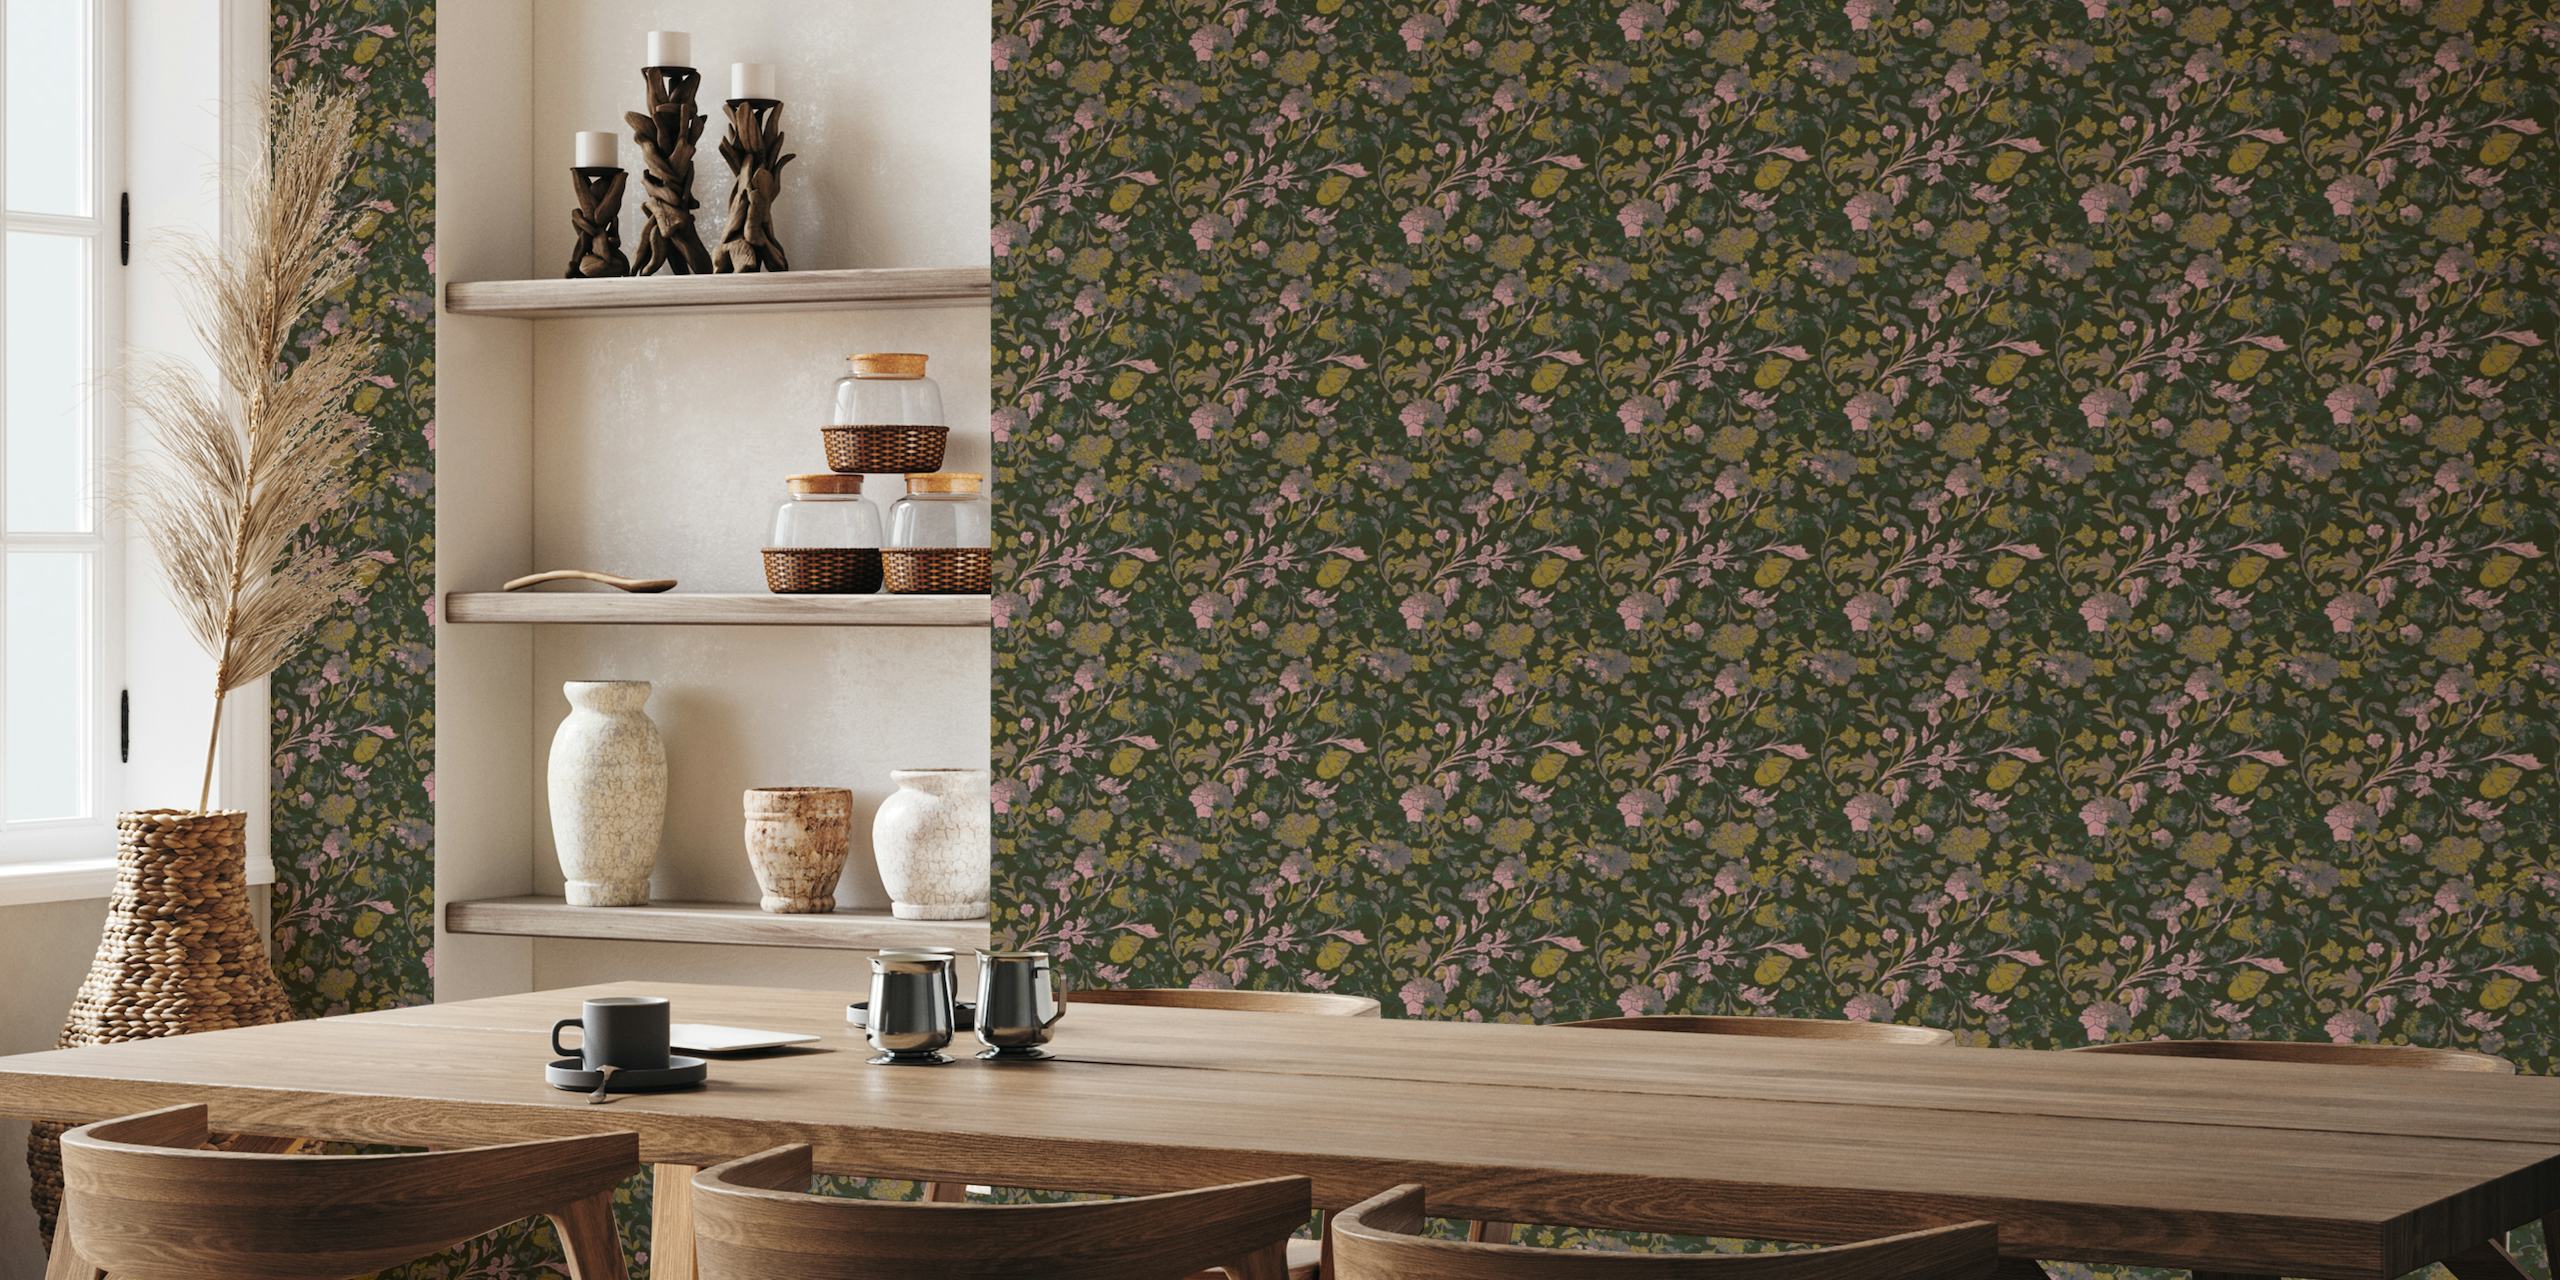 Dark floral wall mural with pink and yellow blooms on a textured background